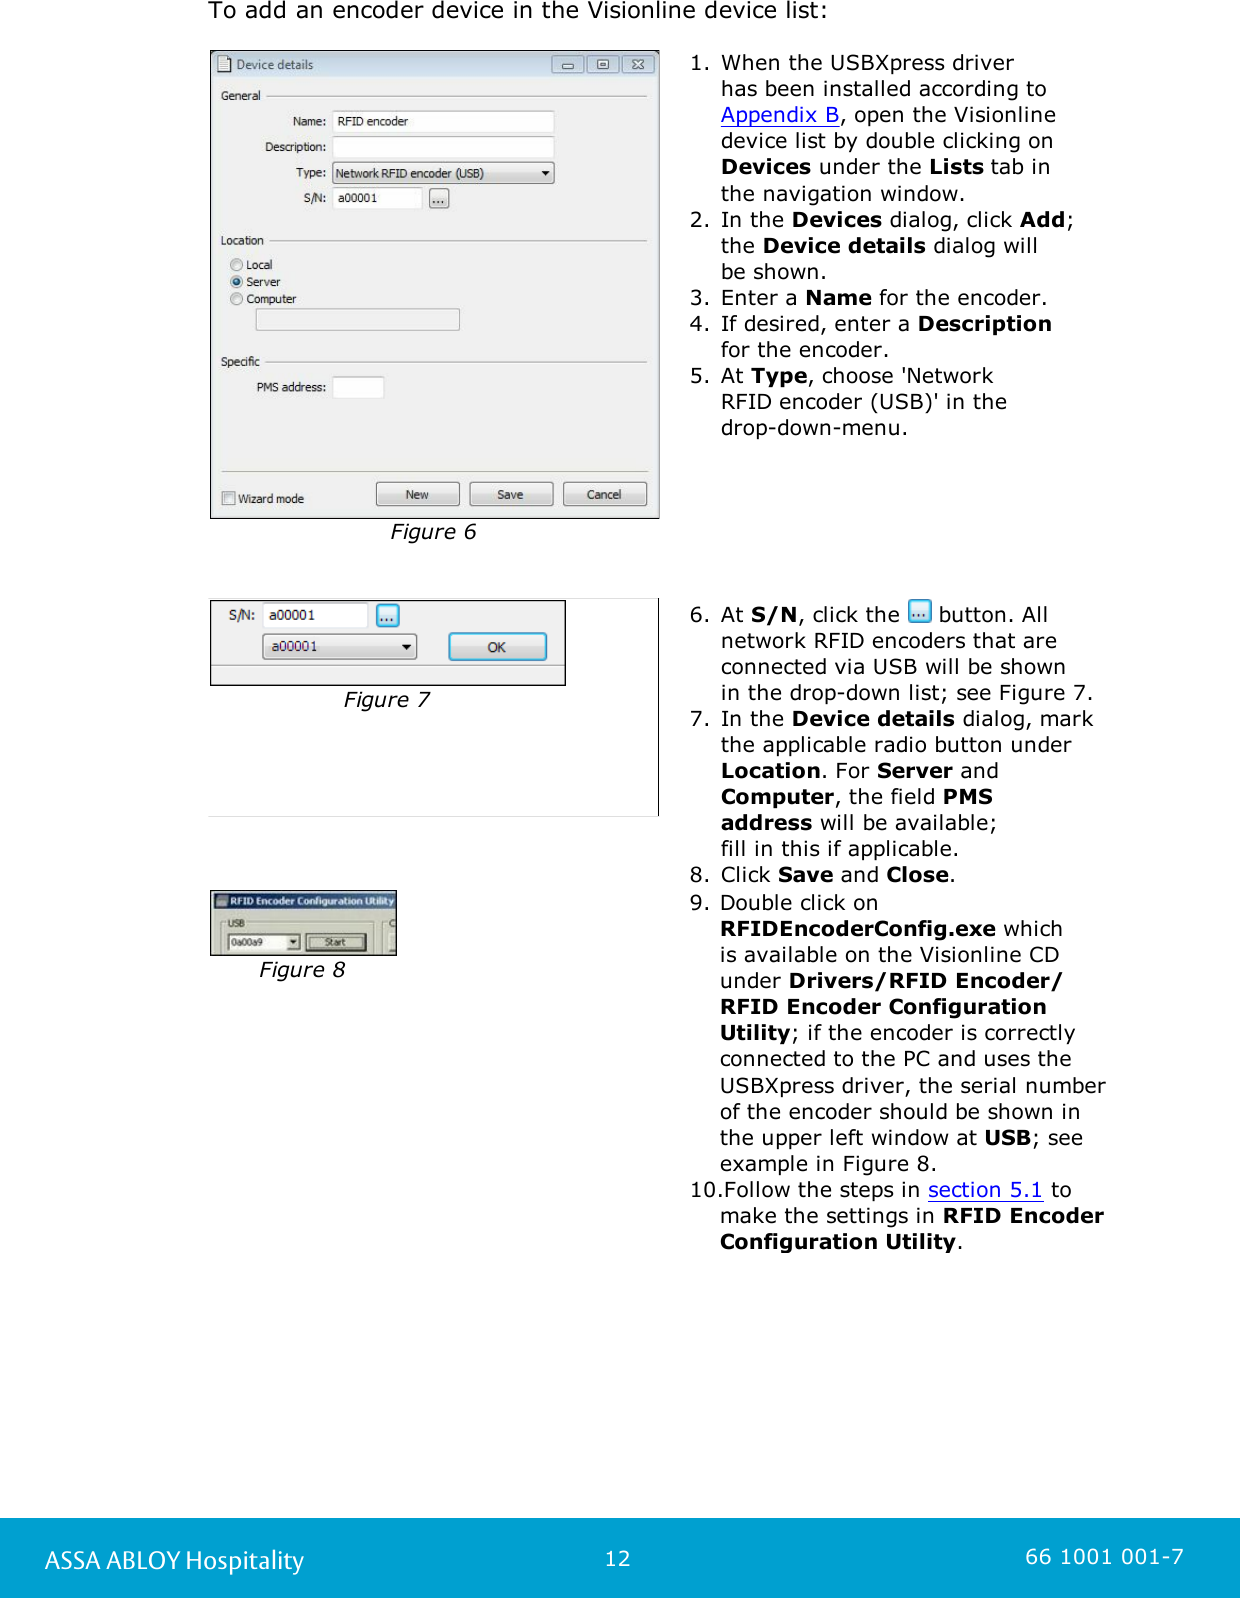 12ASSA ABLOY Hospitality 66 1001 001-7To add an encoder device in the Visionline device list: Figure 61. When the USBXpress driver has been installed according to Appendix B, open the Visionlinedevice list by double clicking on Devices under the Lists tab in the navigation window.2. In the Devices dialog, click Add;the Device details dialog will be shown.3. Enter a Name for the encoder.4. If desired, enter a Description for the encoder.5. At Type, choose &apos;Network RFID encoder (USB)&apos; in the drop-down-menu.Figure 76. At S/N, click the   button. Allnetwork RFID encoders that areconnected via USB will be shown in the drop-down list; see Figure 7. 7. In the Device details dialog, markthe applicable radio button under Location. For Server andComputer, the field PMSaddress will be available; fill in this if applicable.8. Click Save and Close. Figure 89. Double click on RFIDEncoderConfig.exe which is available on the Visionline CDunder Drivers/RFID Encoder/RFID Encoder ConfigurationUtility; if the encoder is correctlyconnected to the PC and uses theUSBXpress driver, the serial numberof the encoder should be shown inthe upper left window at USB; seeexample in Figure 8. 10.Follow the steps in section 5.1 tomake the settings in RFID EncoderConfiguration Utility. 